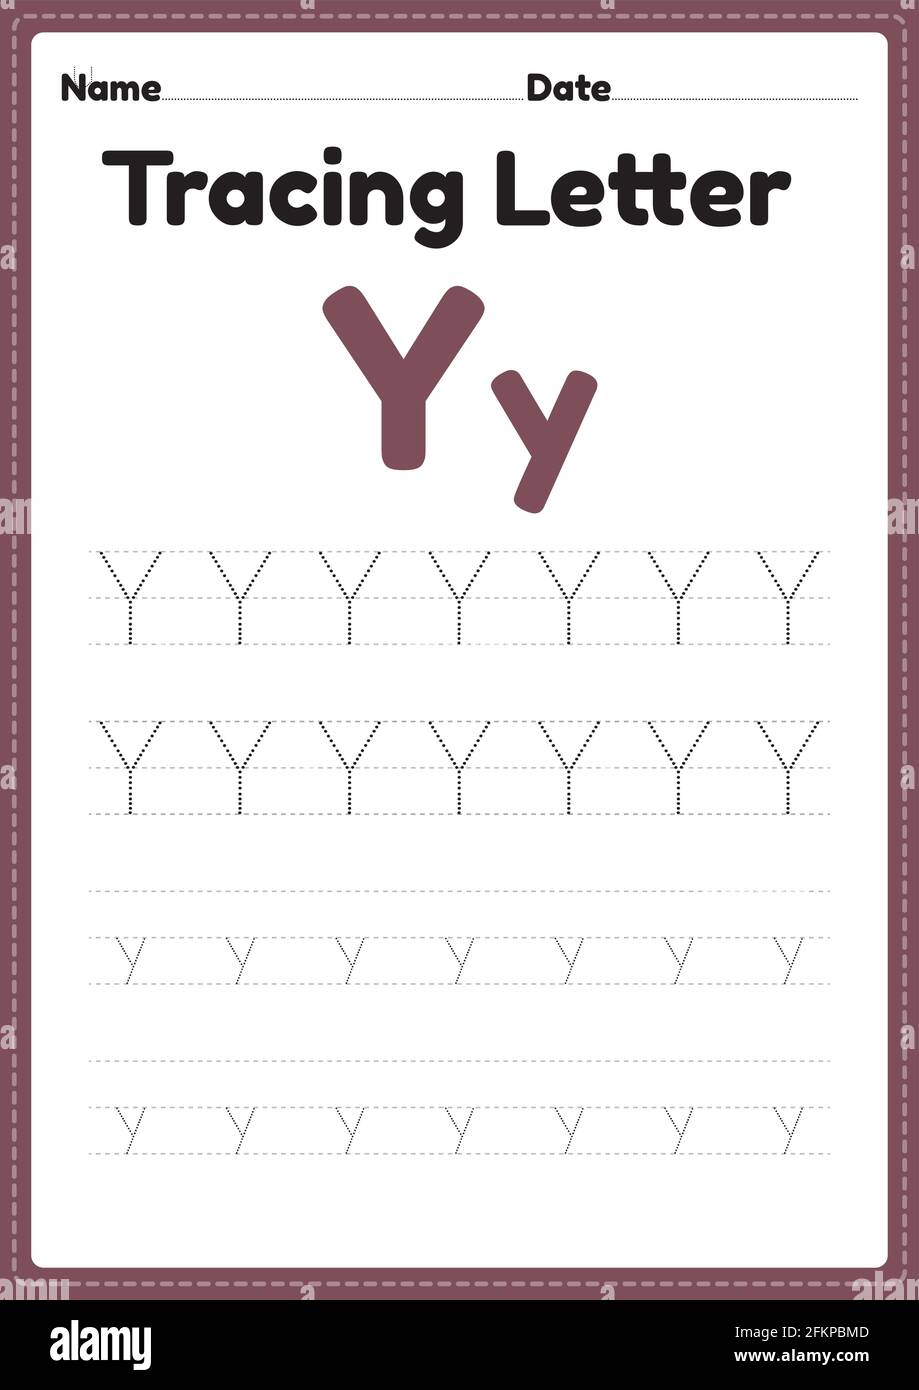 tracing letter y alphabet worksheet for kindergarten and preschool kids for handwriting practice and educational activities in a printable page illust stock vector image art alamy